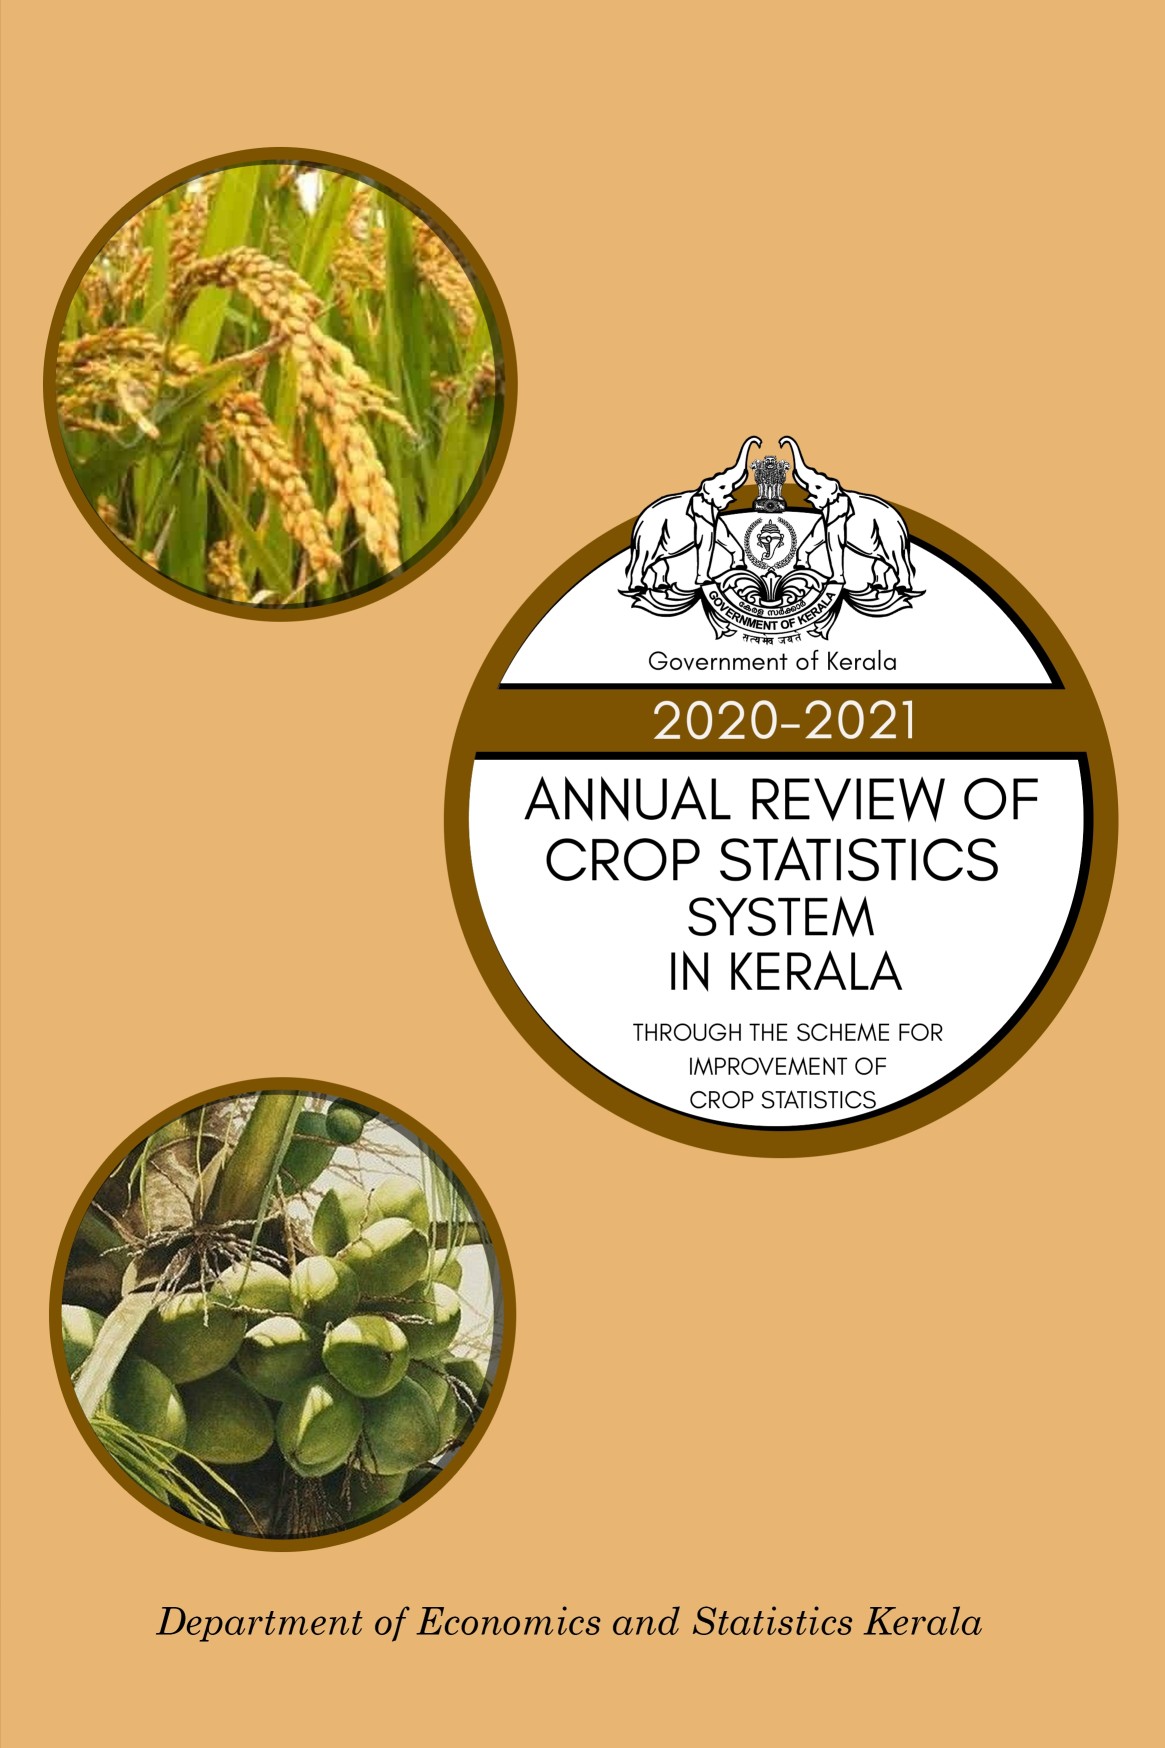 Annual Review of Crop Statistics System in Kerala 2020-2021